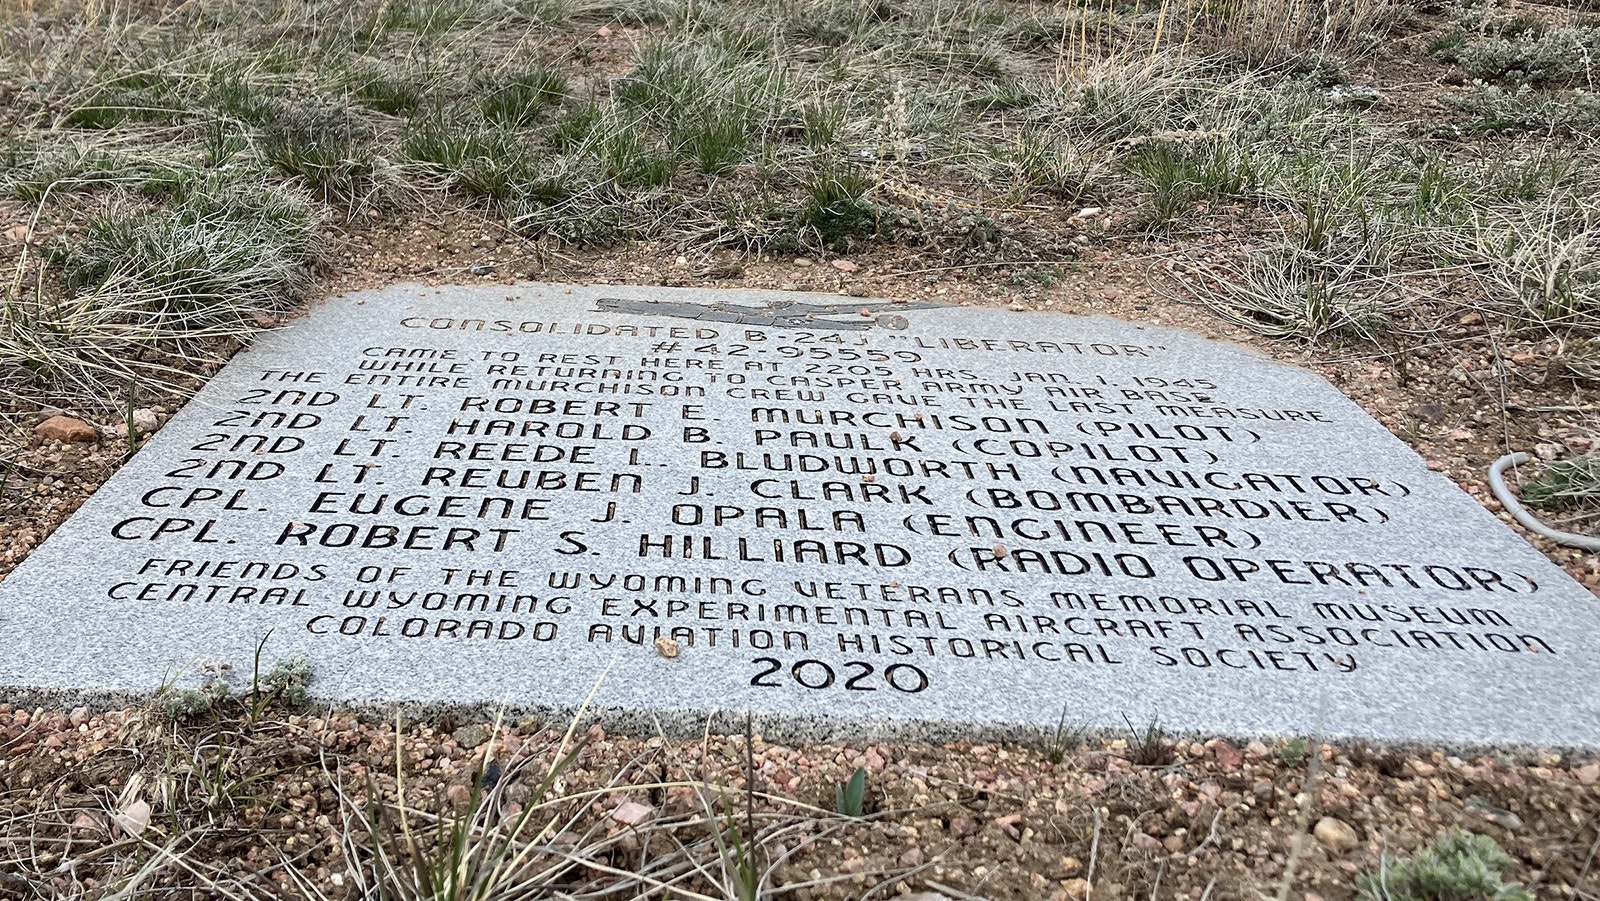 A plaque installed in 2021 on top of a knoll over looks the resting place of the B-24’s wrecked fuselage.